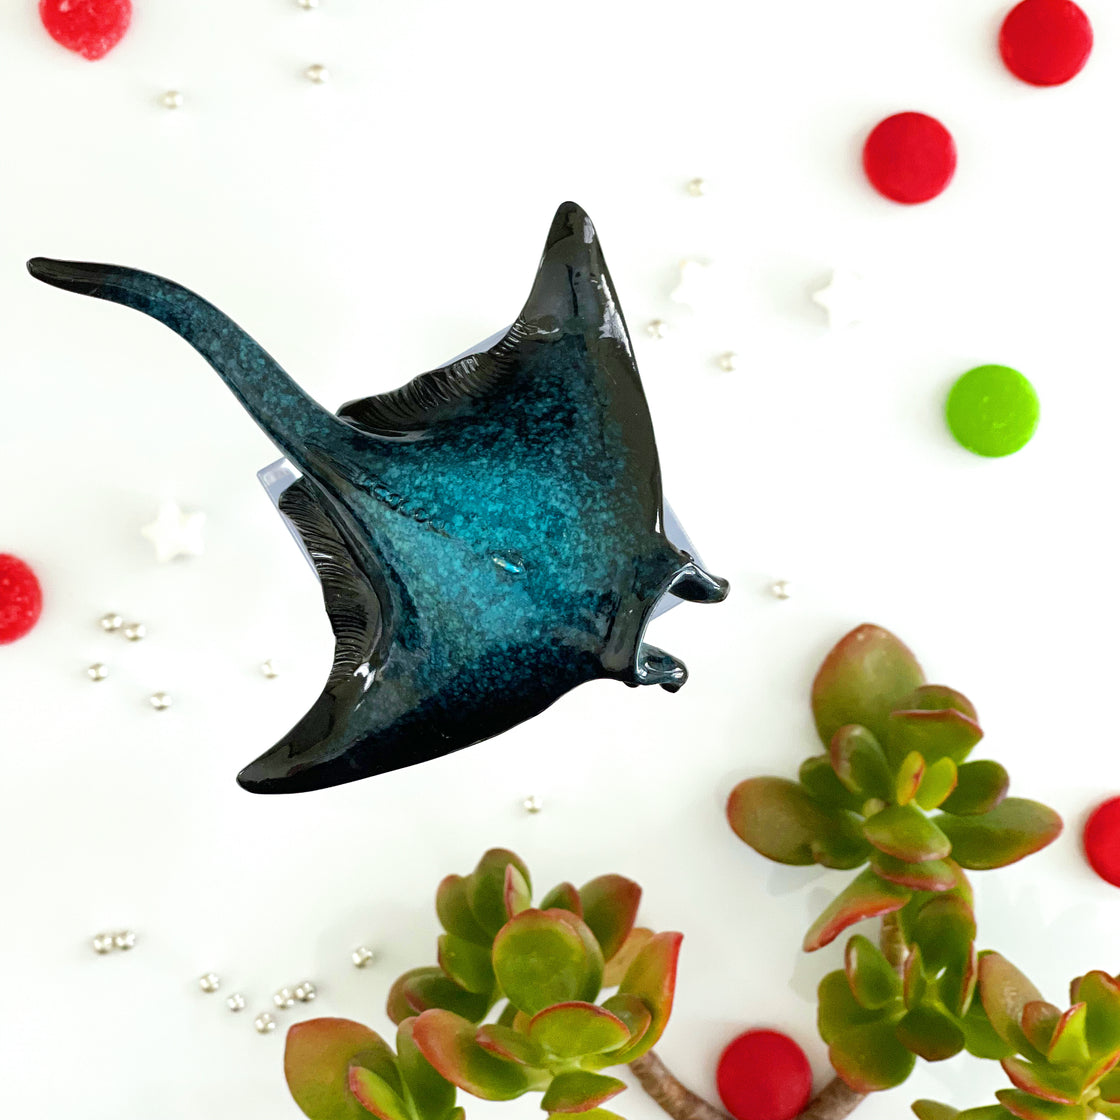 A top-down perspective of the rengora manta ray Christmas ornament set against a backdrop of a green jade leaves and Christmas balls as part of the decorative arrangement